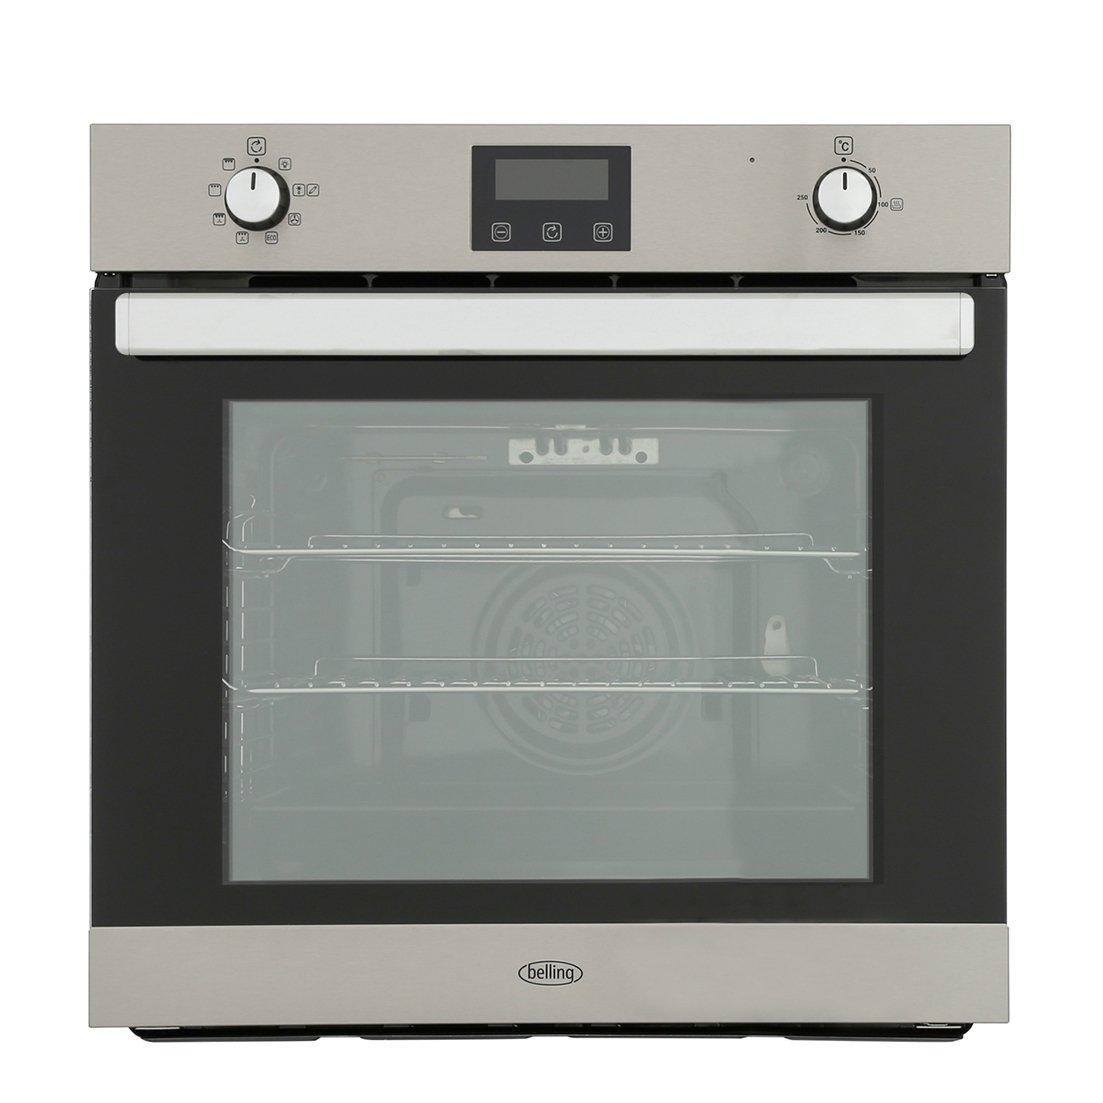 Belling Built-In Electric Single Oven in Stainless Steel